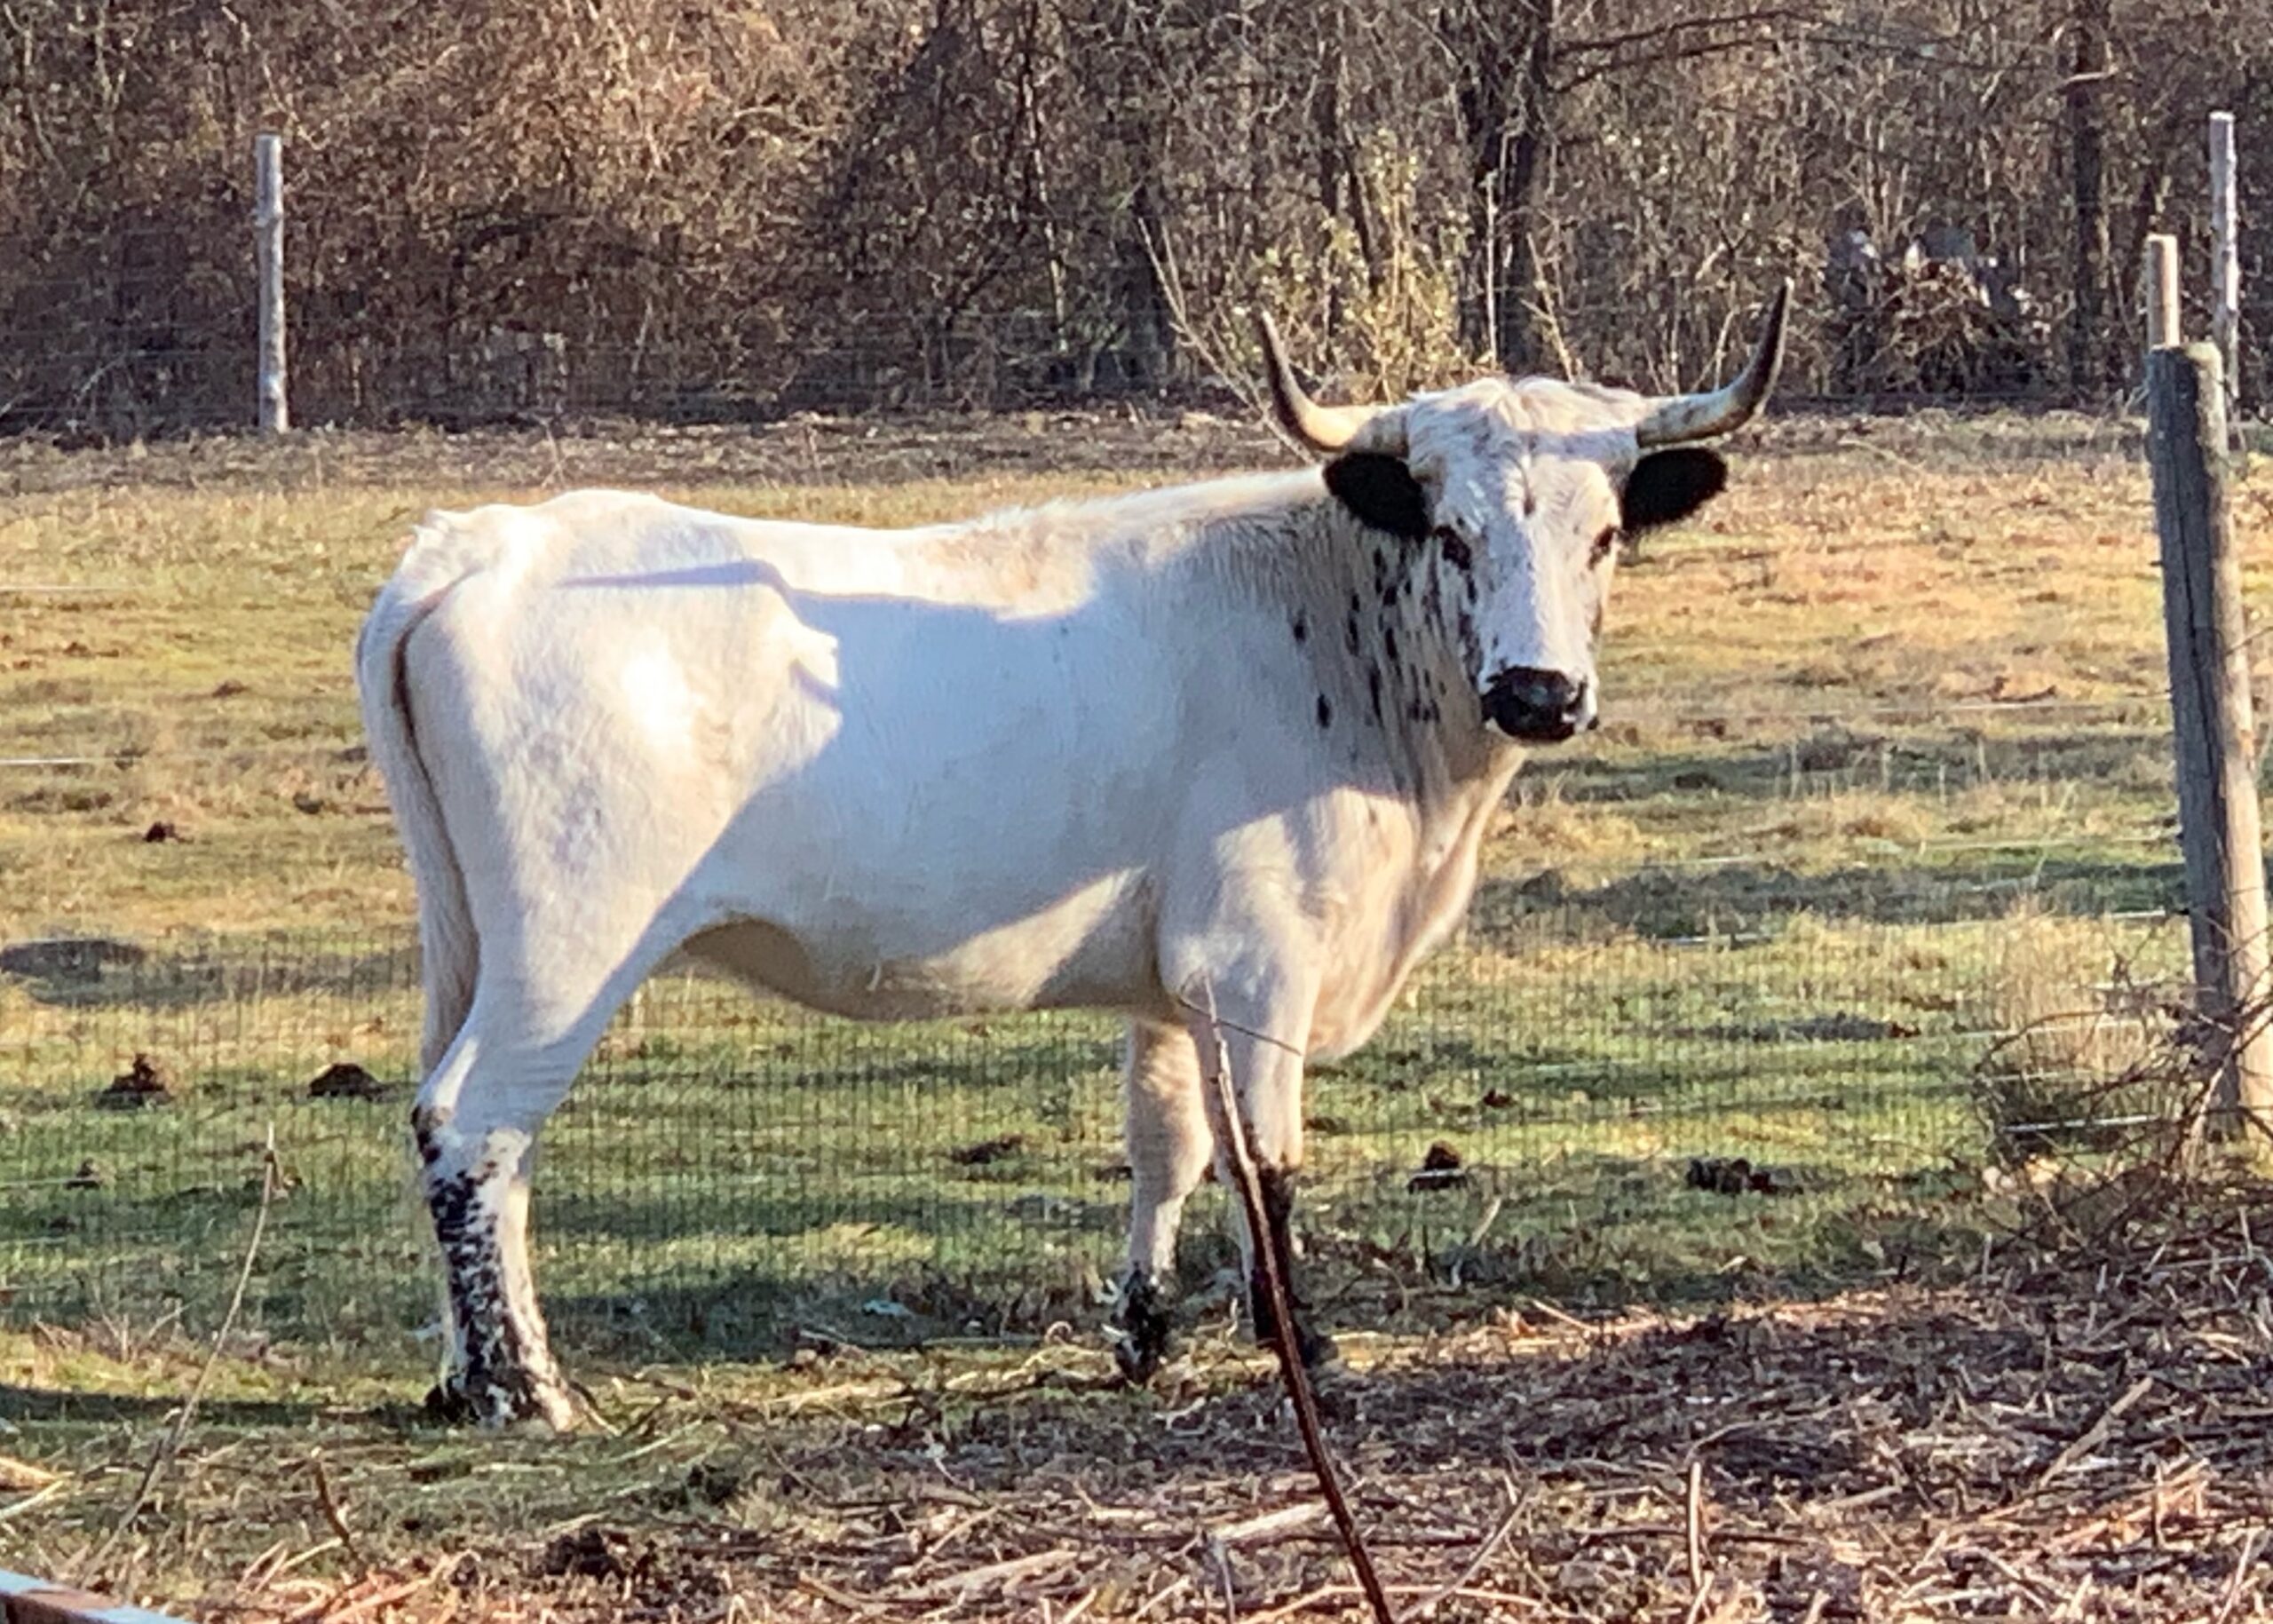 After escape, Harriet the heifer finds new home in Hopkinton